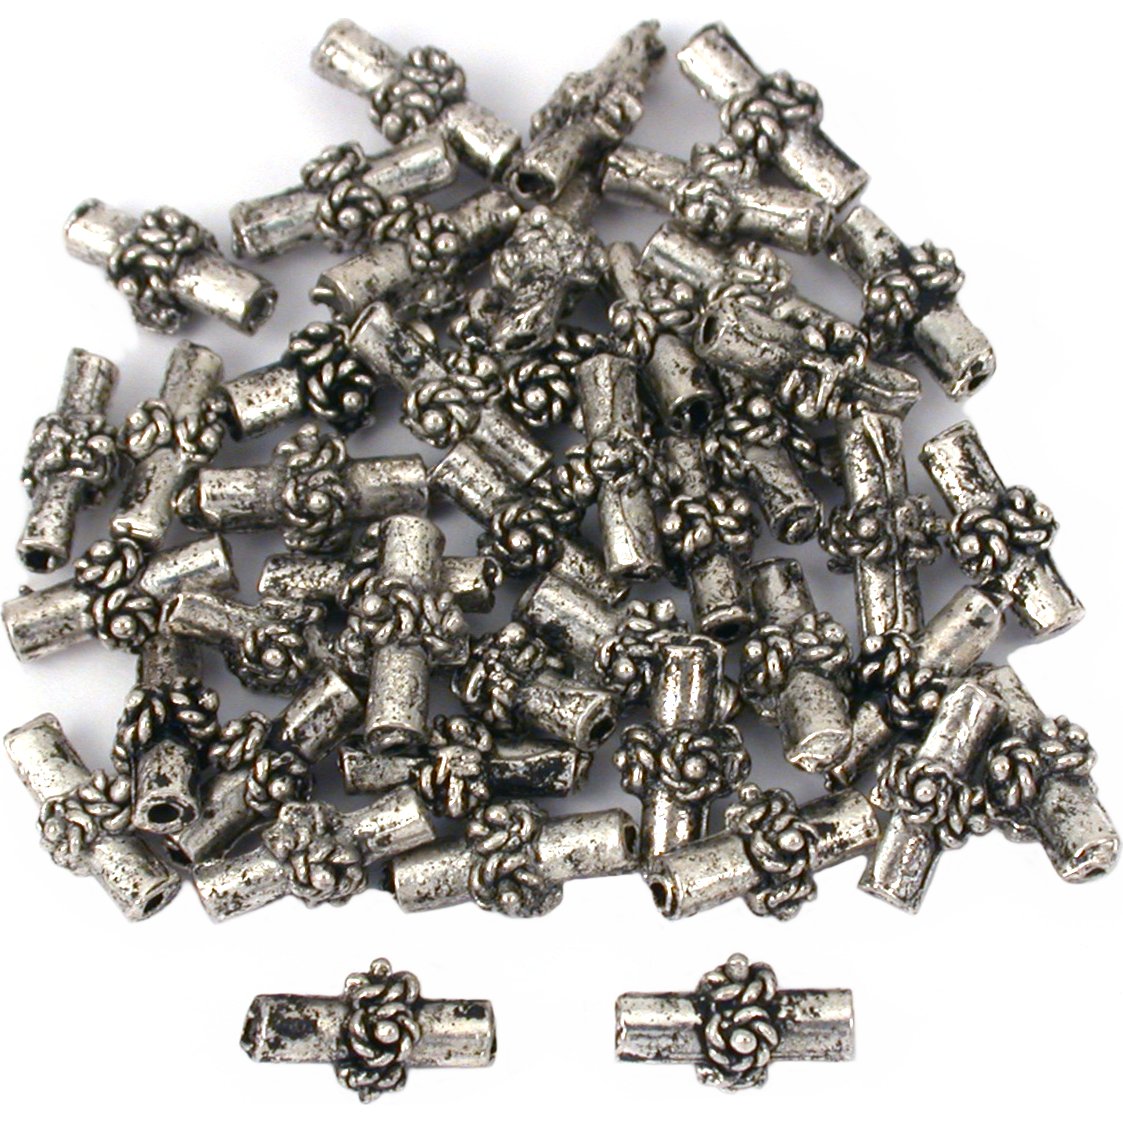 Bali Tube Rope Antique Silver Plated Beads 9.5mm 15 Grams 40Pcs Approx.